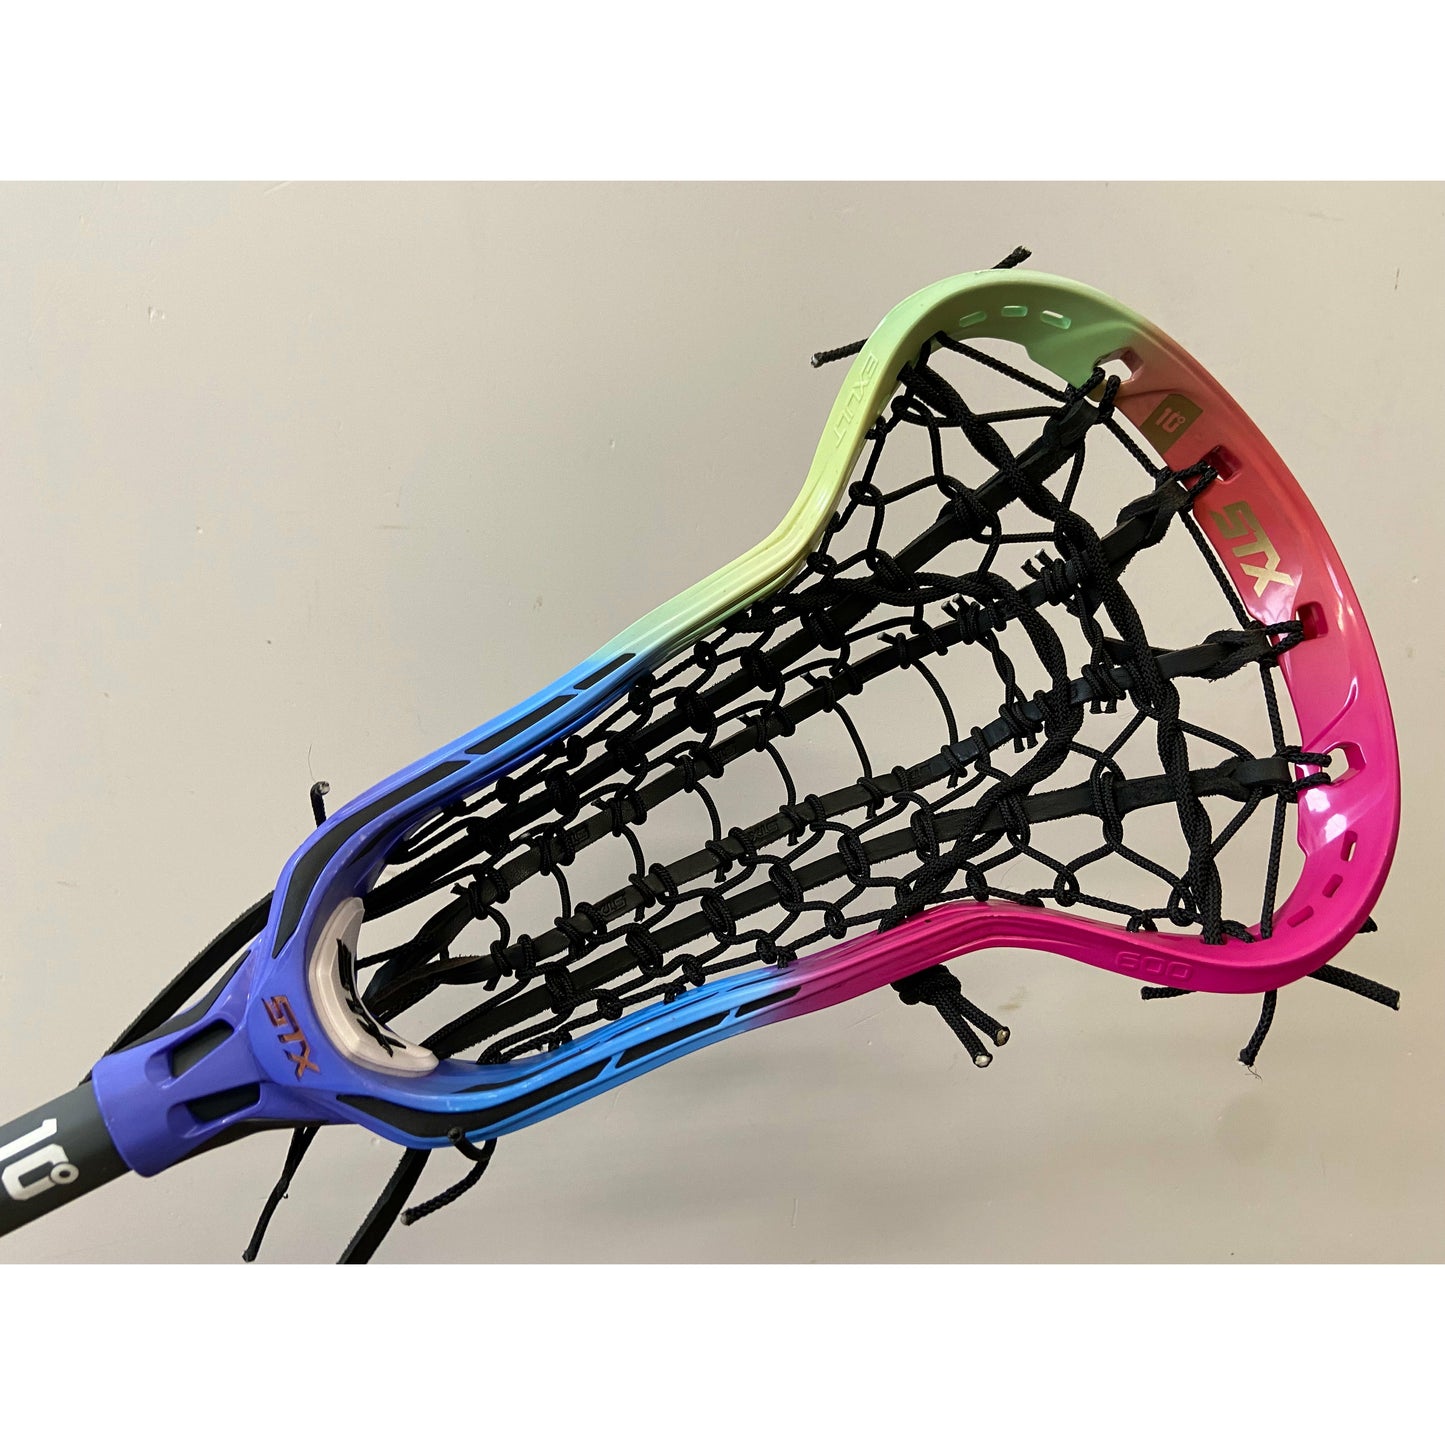 Dyed STX Exult 600 with Comp 10 Handle and Ignite Mesh